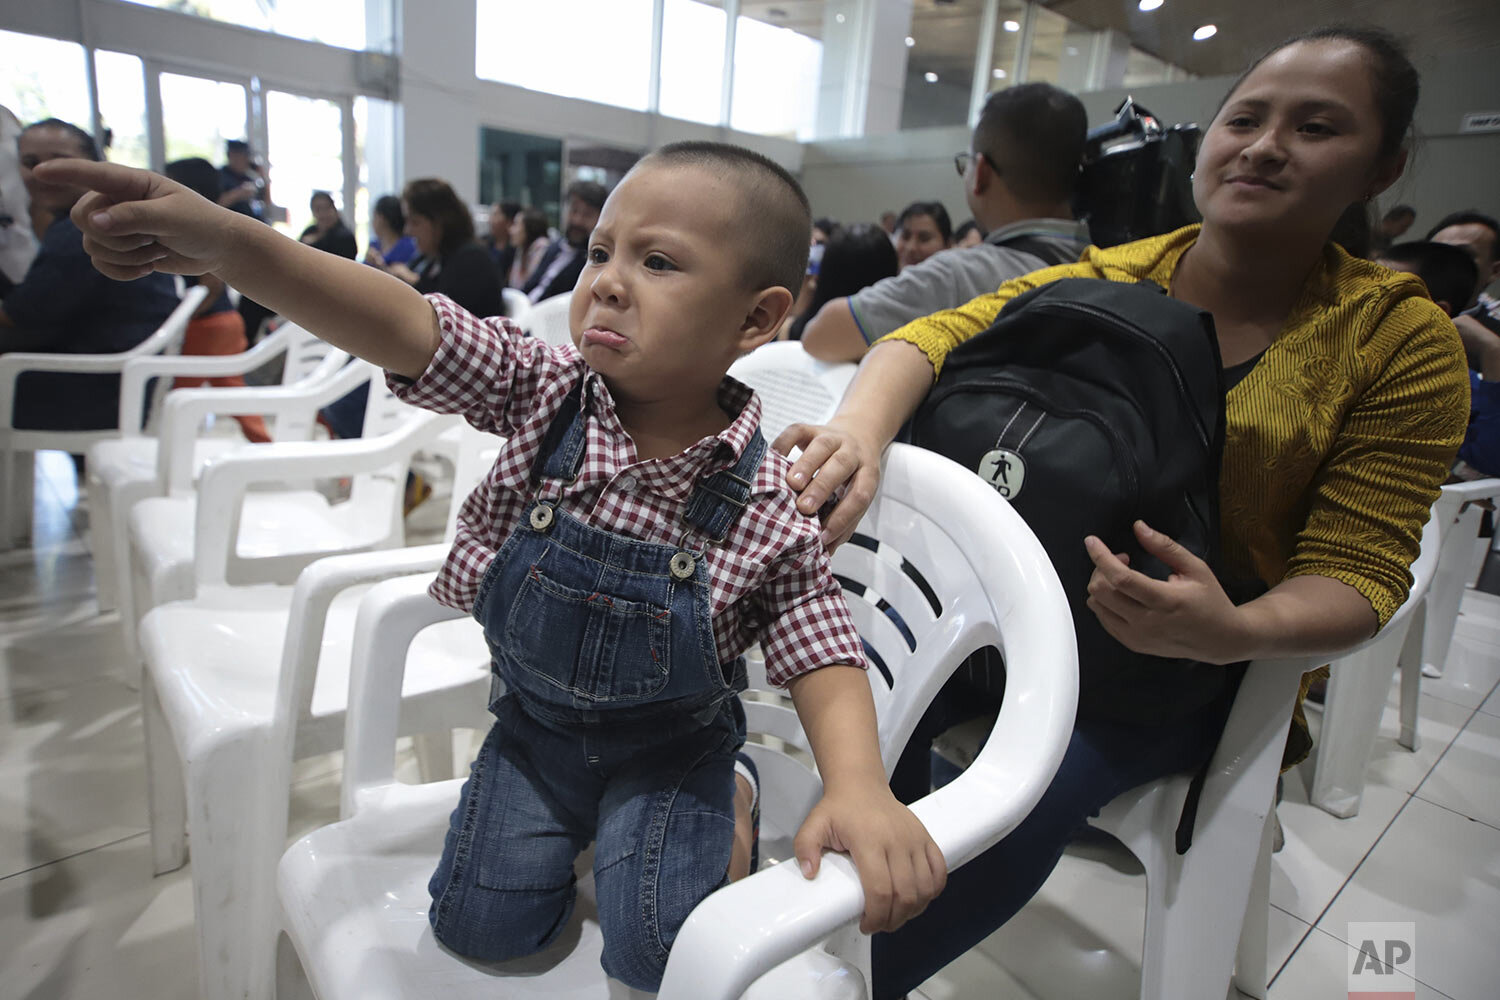  Isaac Tepas, comforted by his mother Alba Marquez de Tepas, points toward his father William Tepas who departs with a group of Salvadorans granted temporary visas to work on a rose farm in Mississippi, following a send-off event at El Salvador Inter